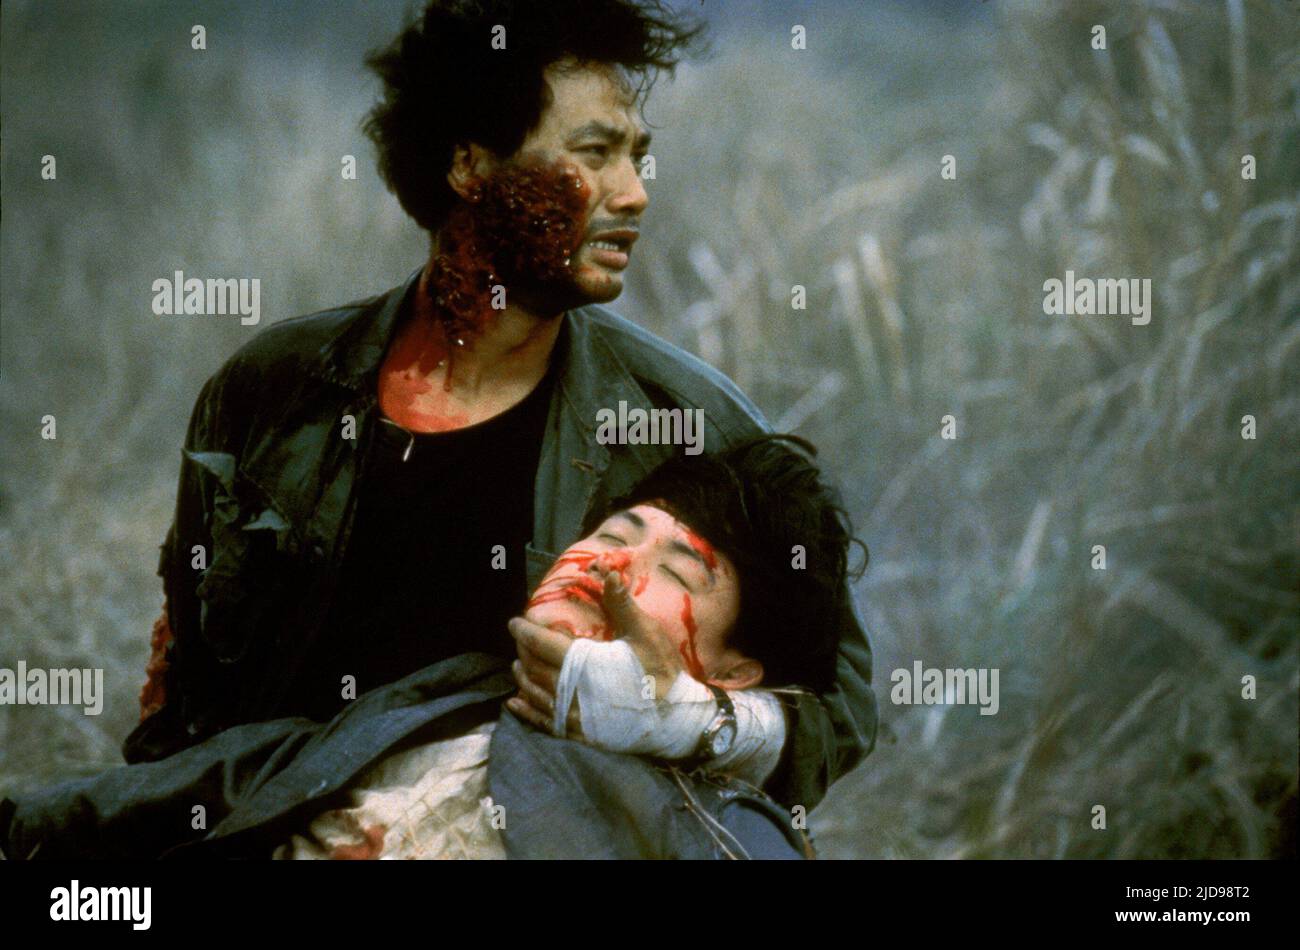 CHEUNG,LEE, BULLET IN THE HEAD, 1990, Stock Photo